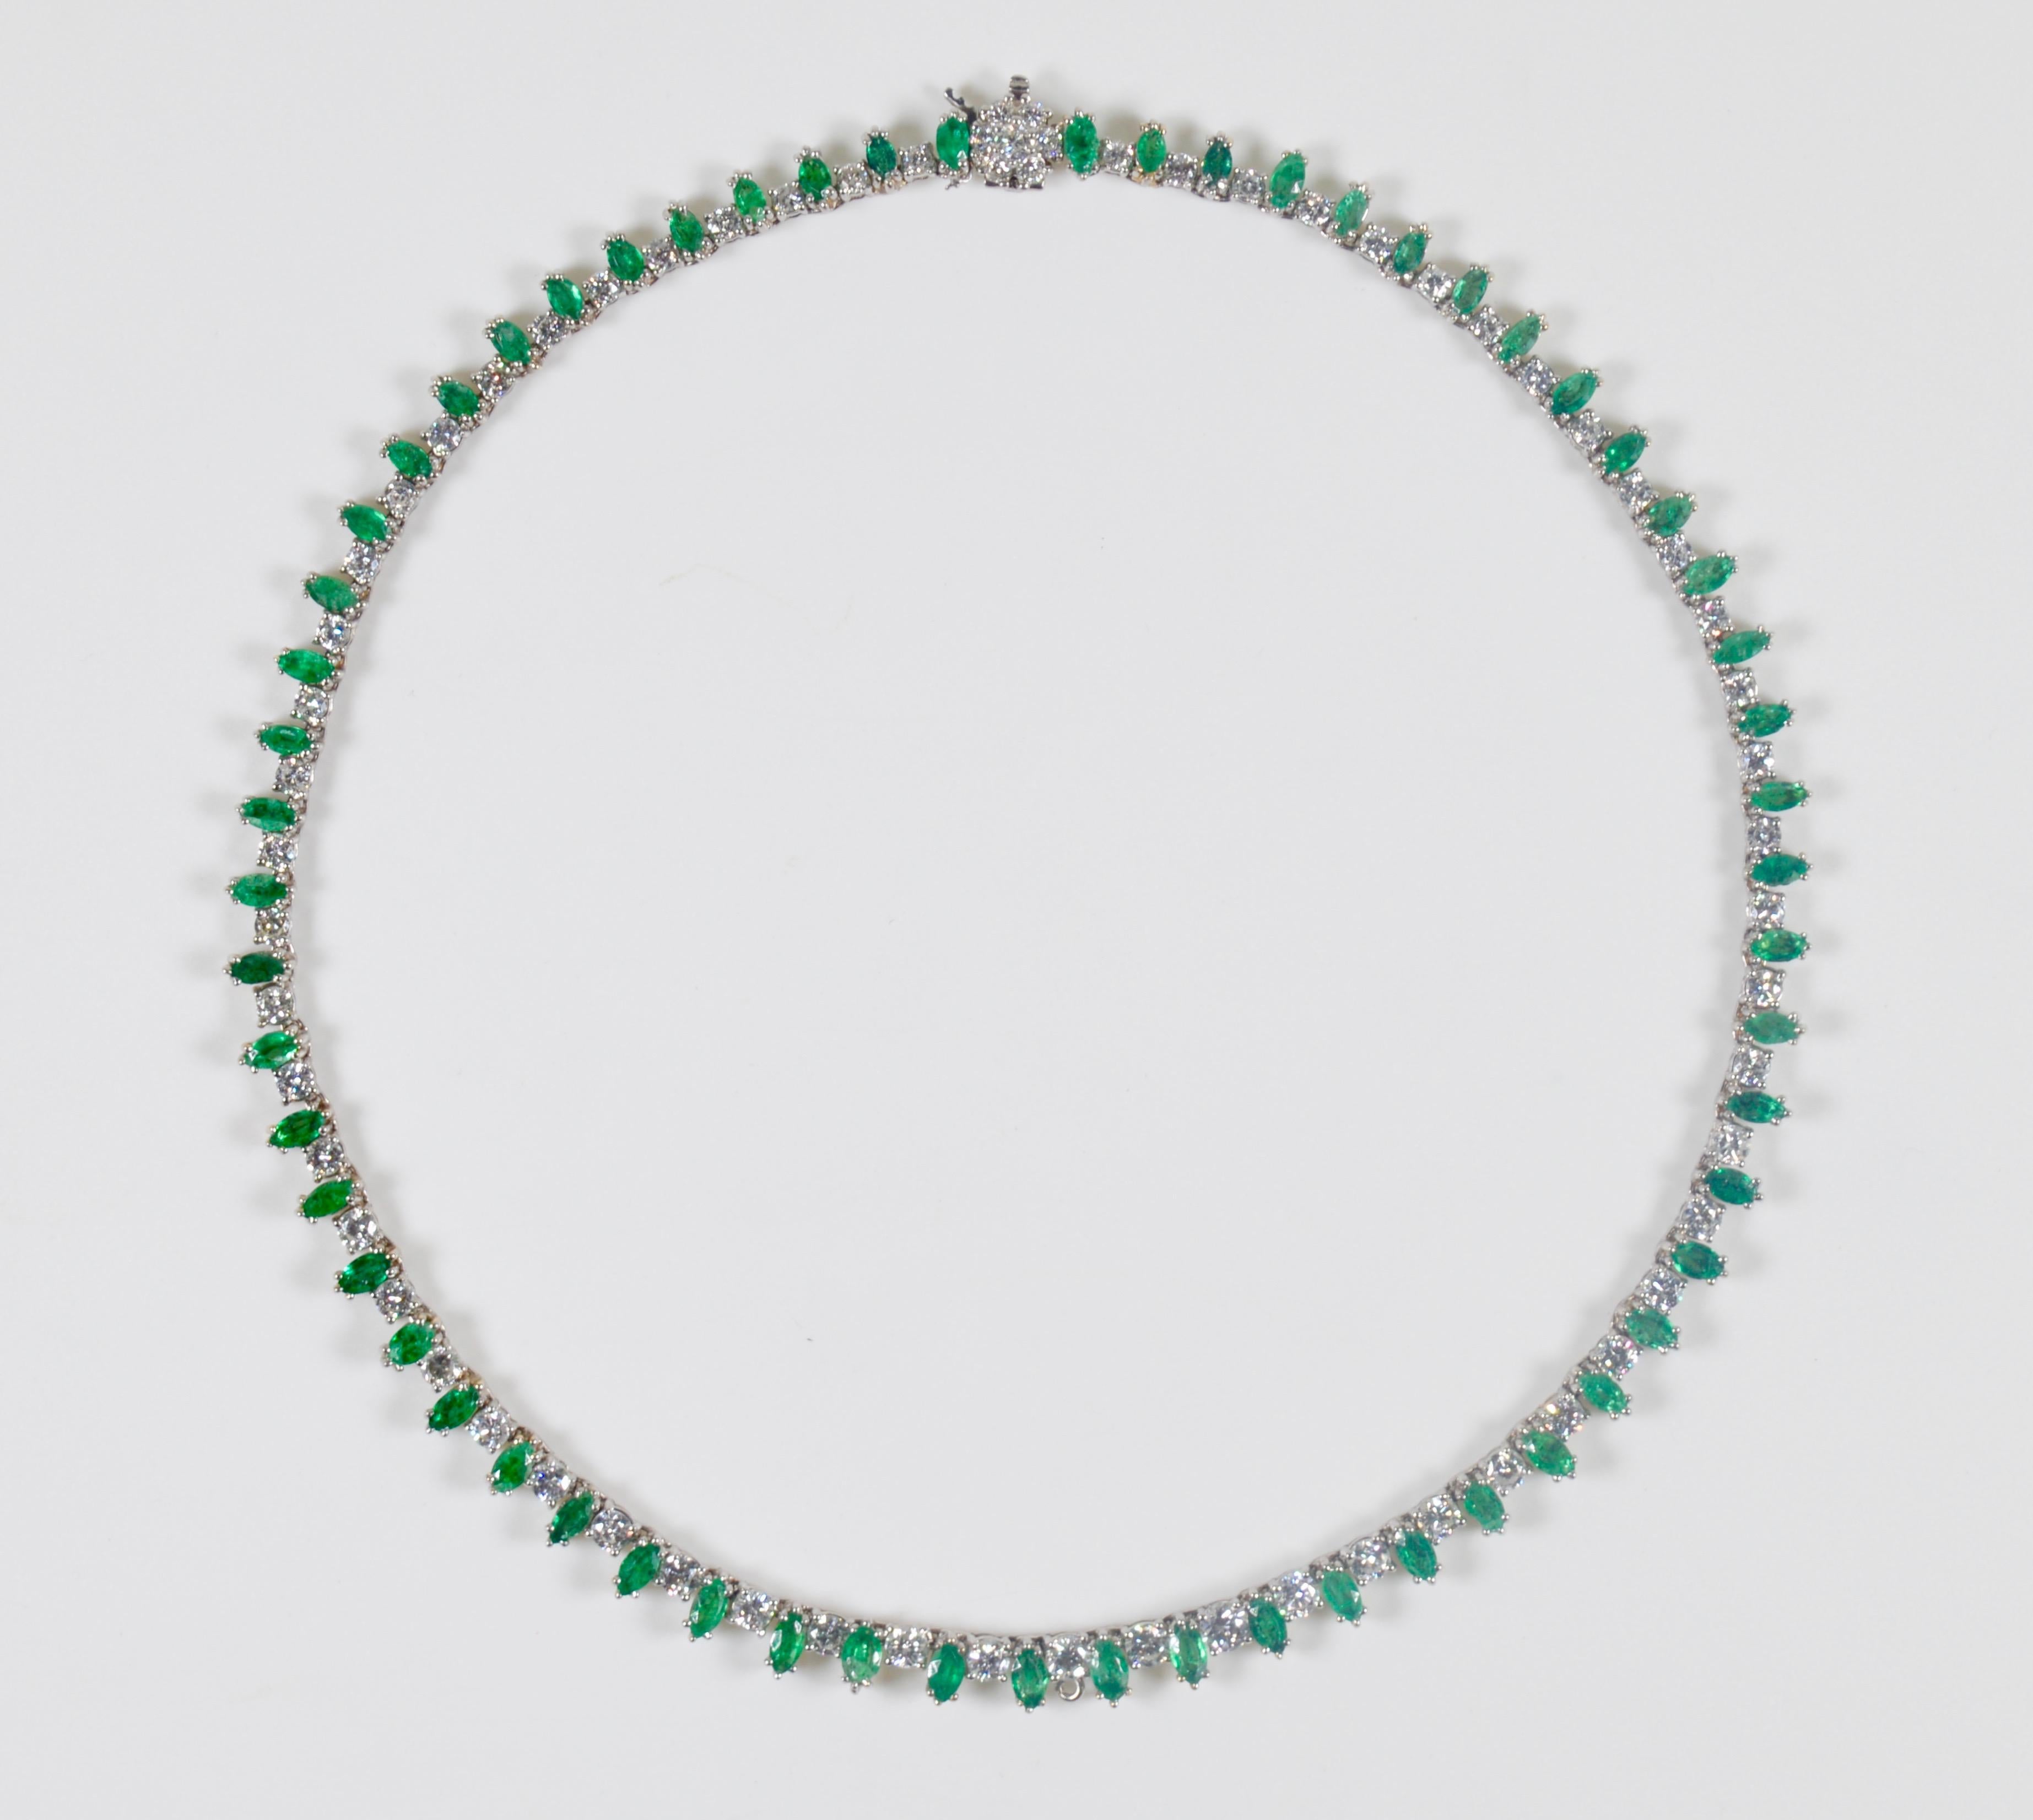 A beautiful white gold, diamond and emerald riviere necklace containing 67 round brilliant cut diamonds weighing approximately 5.35 carats total and 61 marquise shape mixed cut emeralds weighing approximately 3.60 carats total. Many of the emeralds.